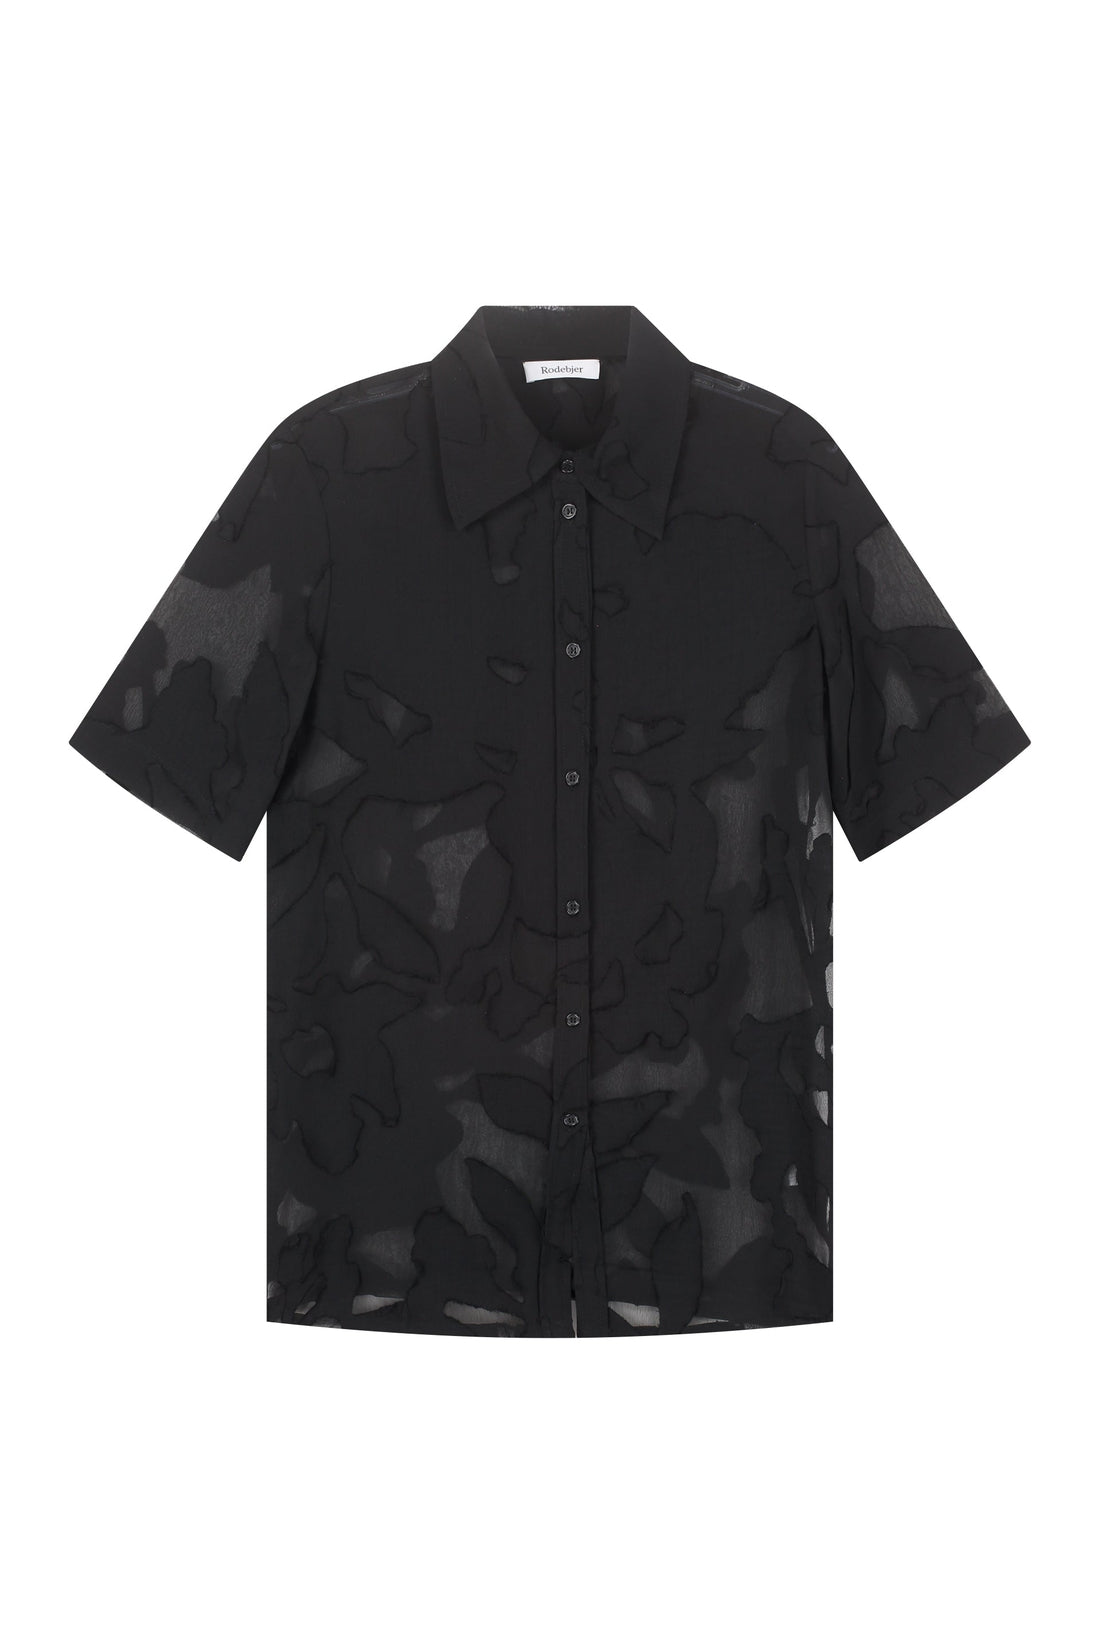 Rodebjer-OUTLET-SALE-Taddeo chiffon shirt-ARCHIVIST